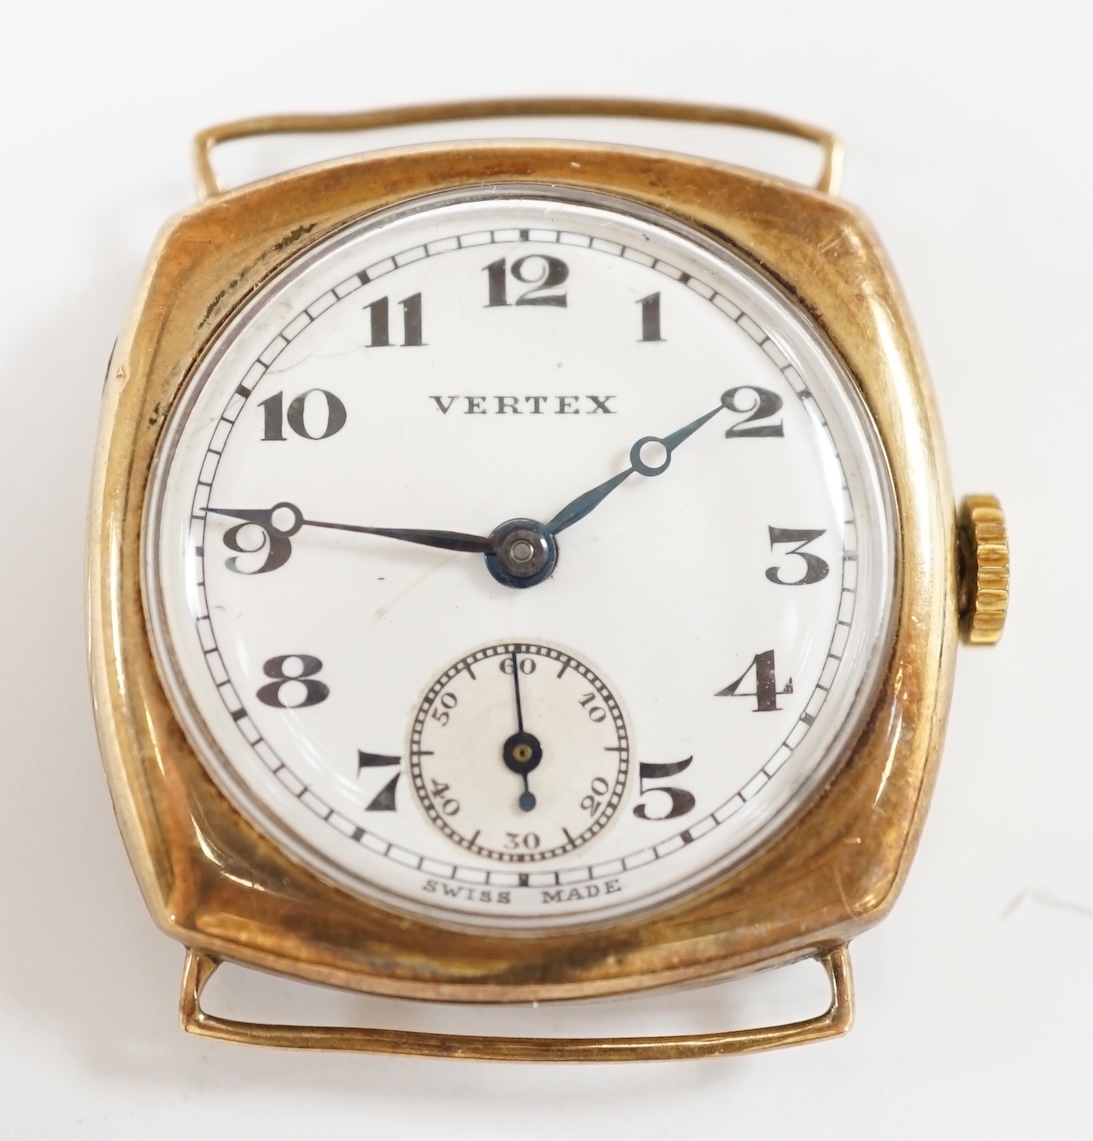 A 1920's 9ct gold Vertex manual wind wrist watch, no strap, with Arabic dial and engraved inscription, gross weight 20.4 grams. Condition - poor